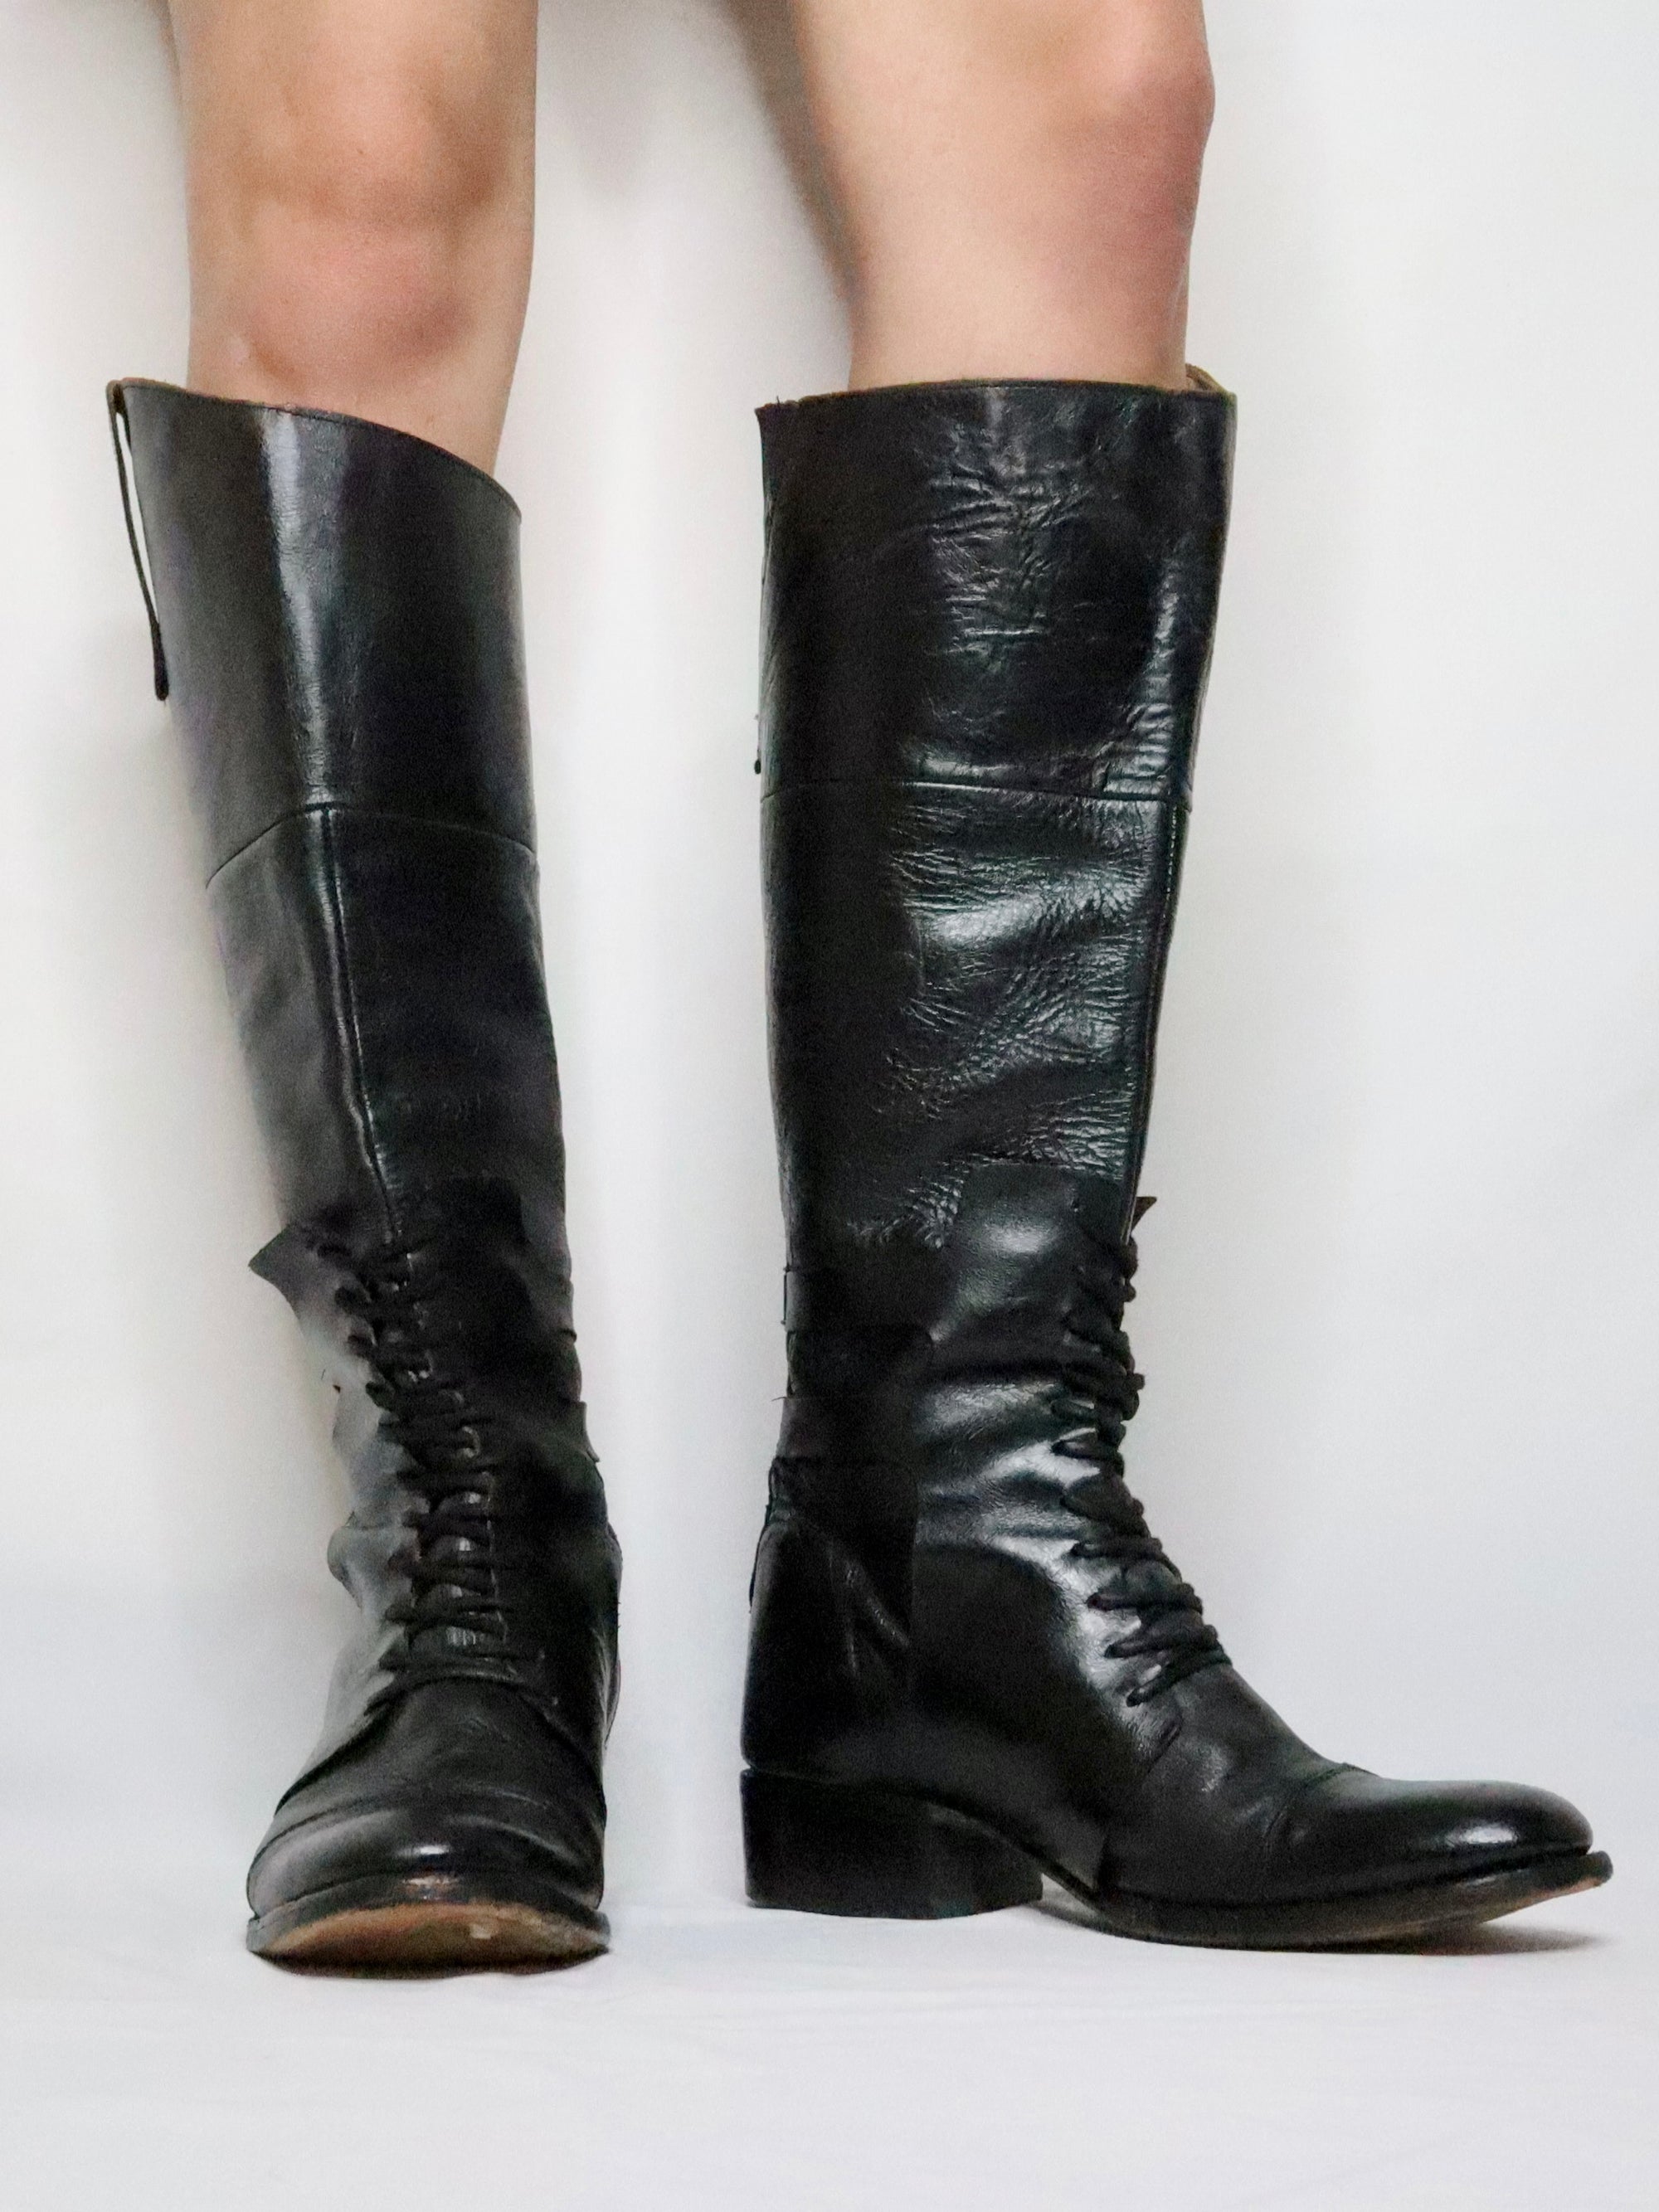 Tall Black Leather Riding Boots (8.5-9 US)